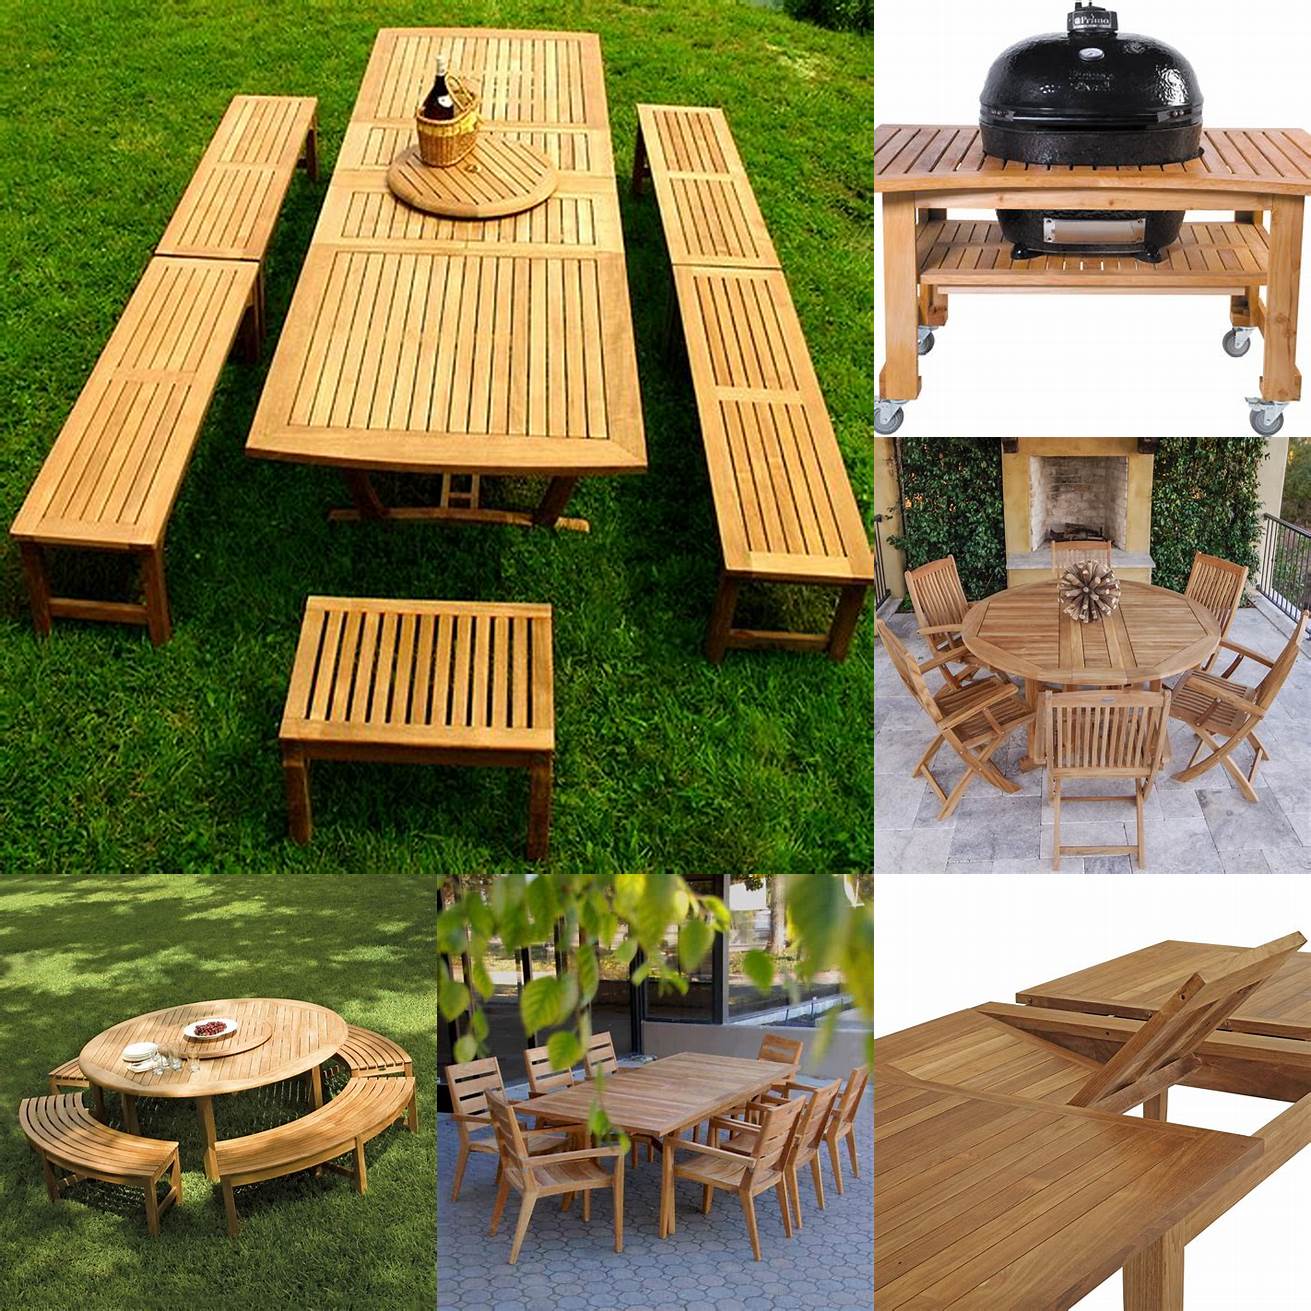 Teak Picnic Table with a Grill